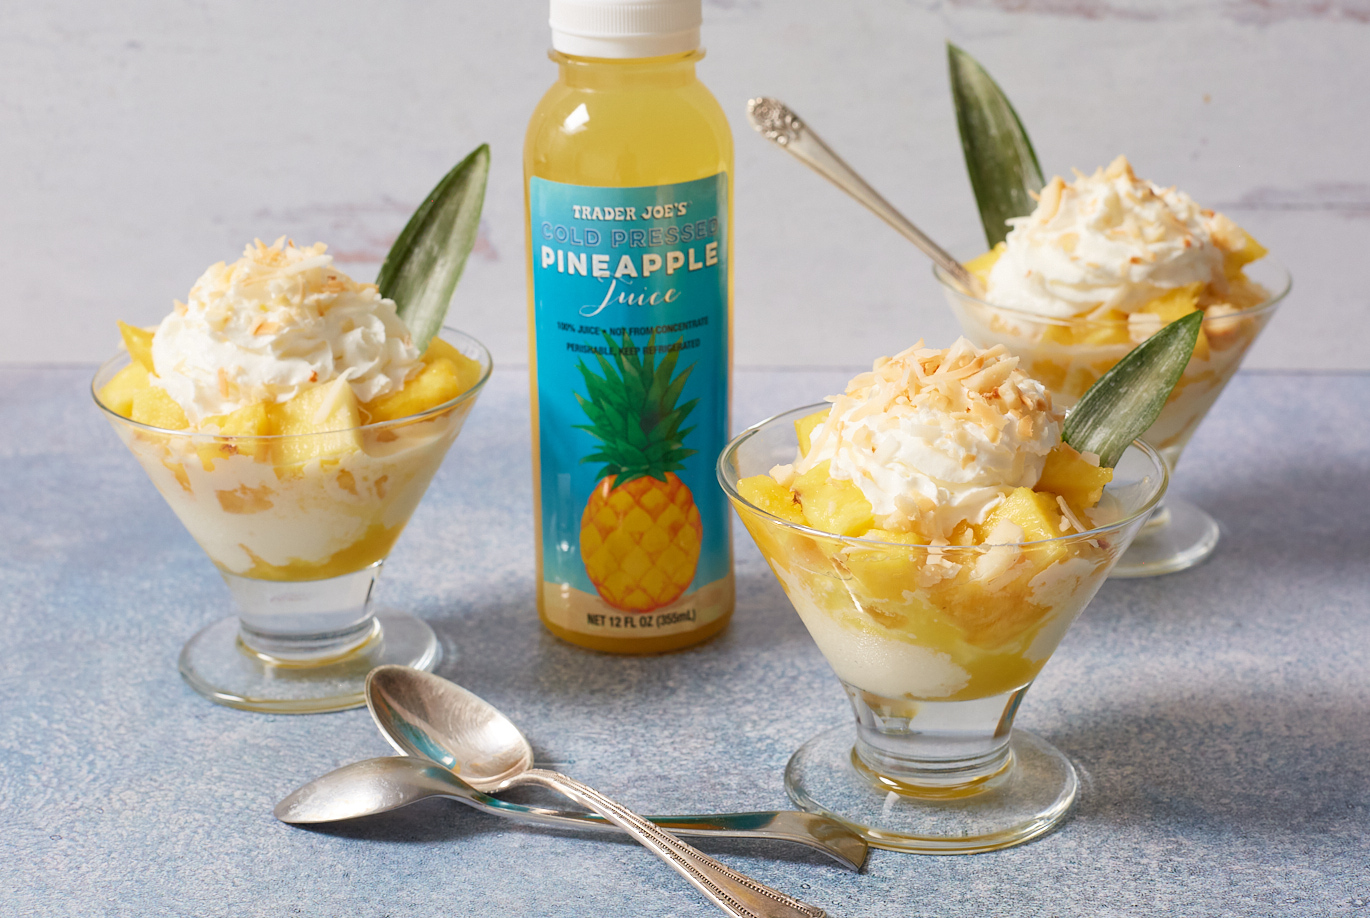 Trader Joe's Cold Pressed Pineapple Juice; used in recipe for Pineapple Parfait - in 3 dessert glasses with pineapple chunks, ice cream, whipped cream, toasted coconut flakes and macadamia nuts